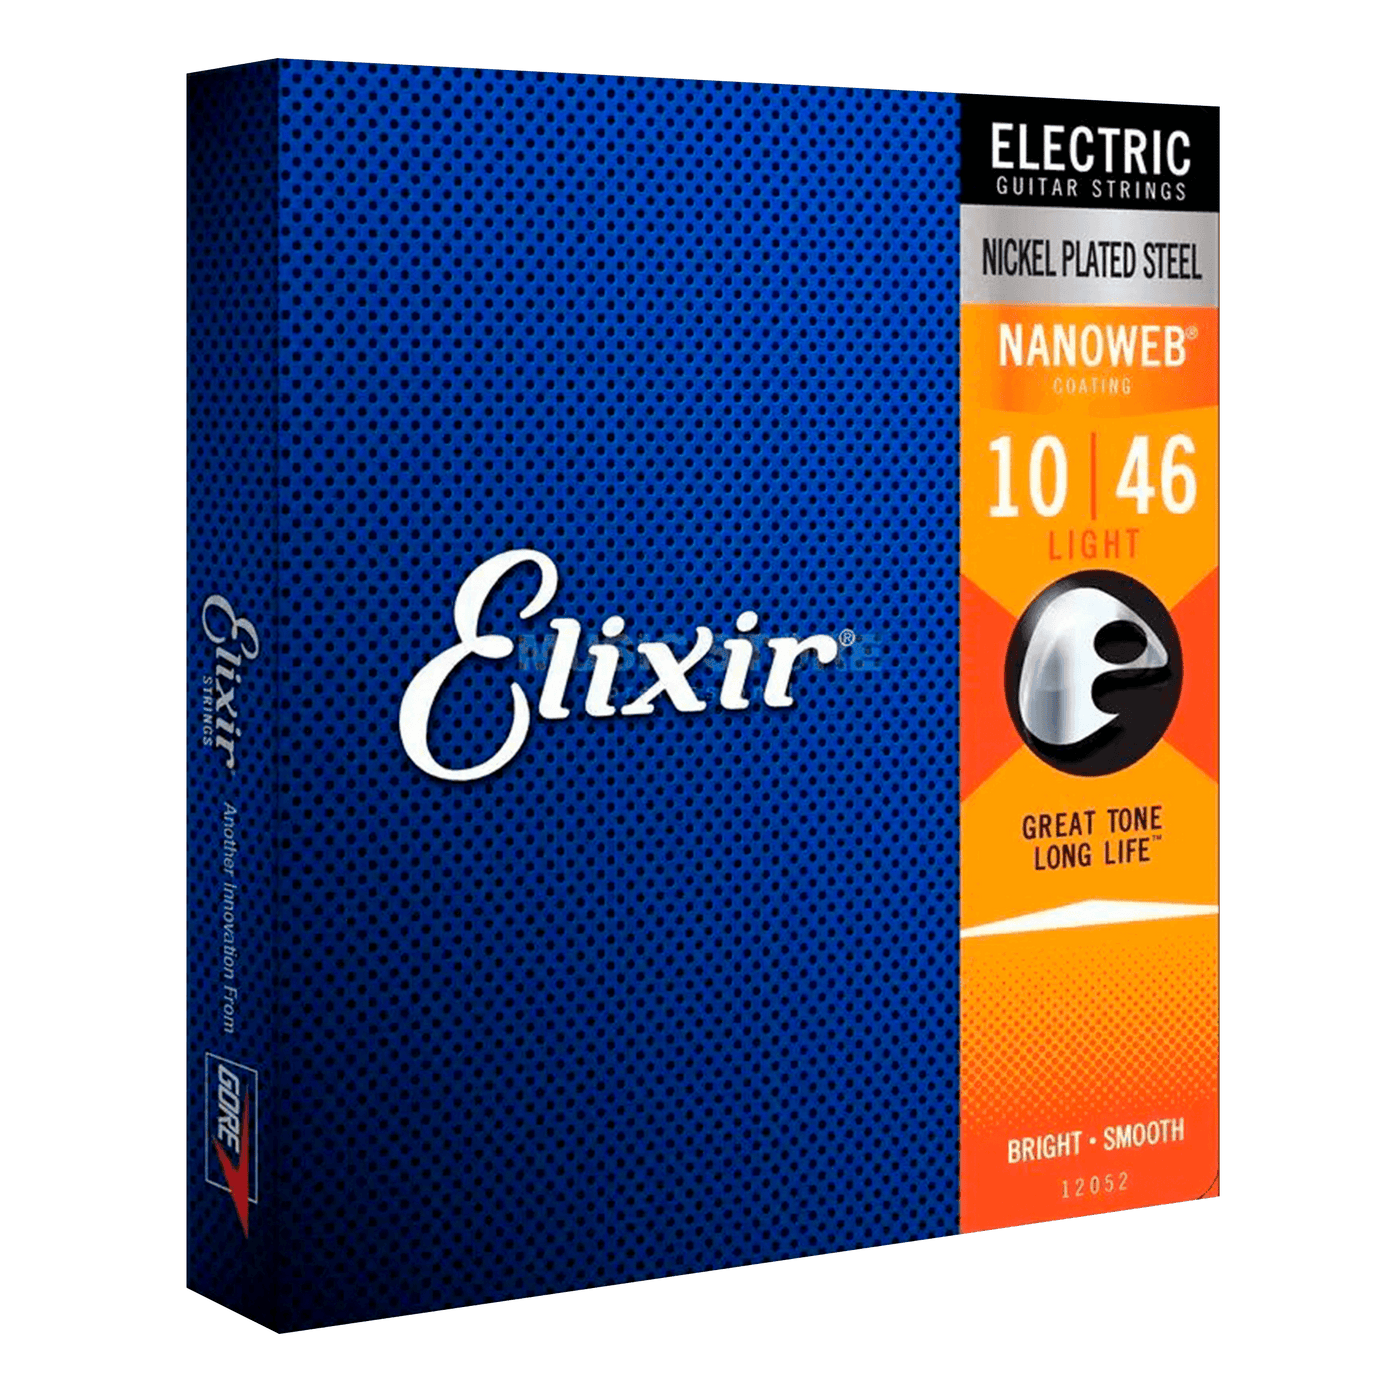 Elixir Nickel Plated Steel Nanoweb Light (10-46) - $19990 - Gearhub - Elixir® Electric Nickel Plated Steel Strings with NANOWEB® Coating deliver the presence, punch, and personality of traditional electric guitar strings but with extended tone life. Gauges: .010 – .013 – .017 – .026 – .036 – .046.